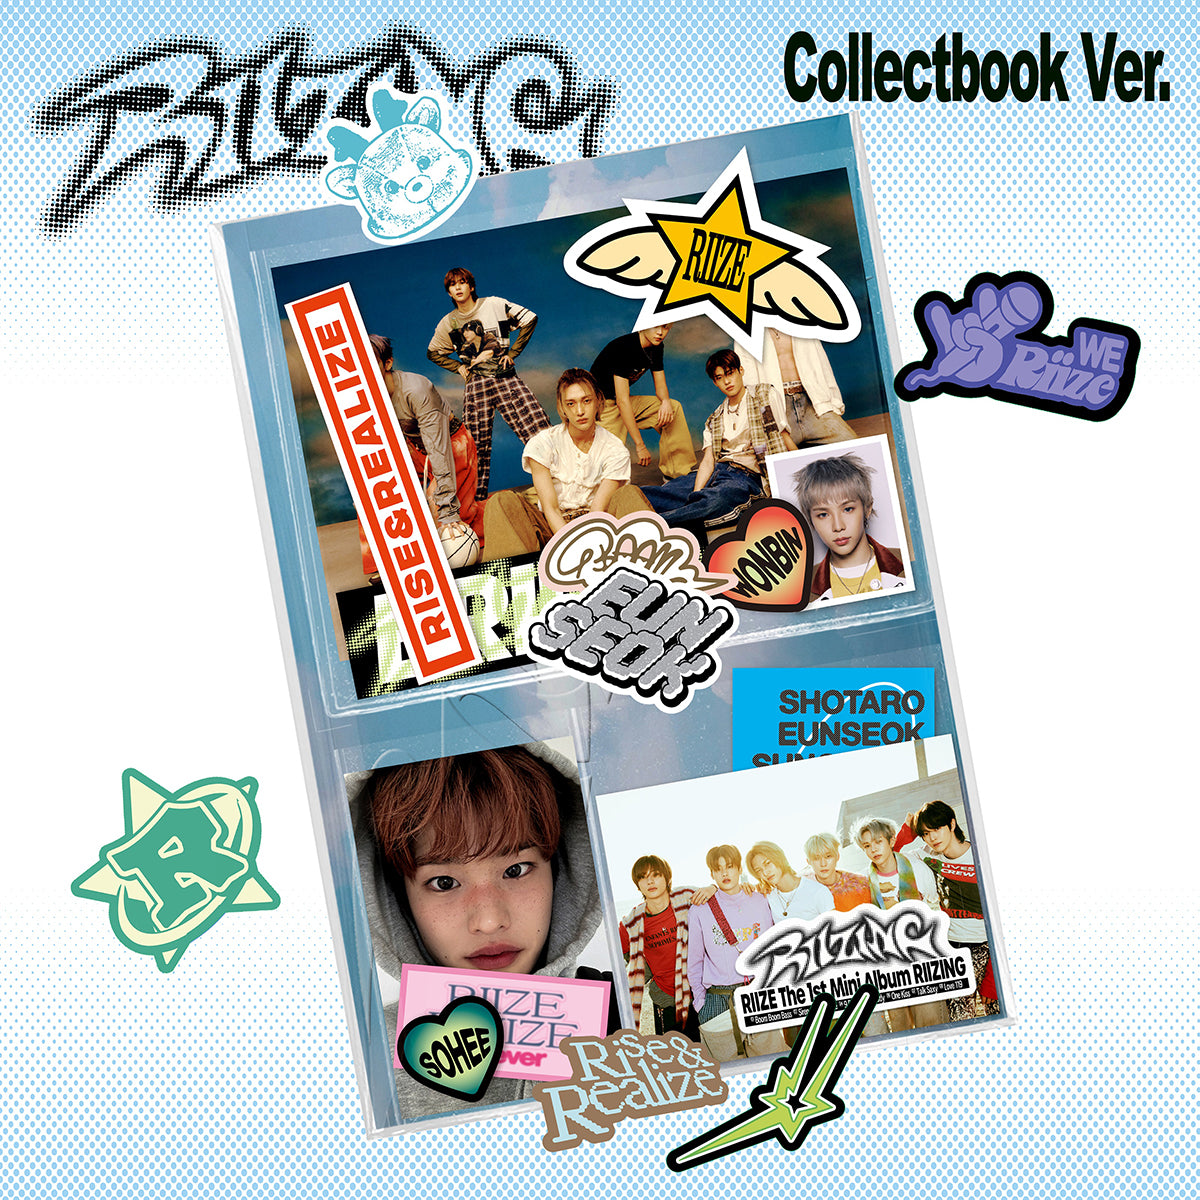 RIIZE - RIIZING (Collect Book Ver.)